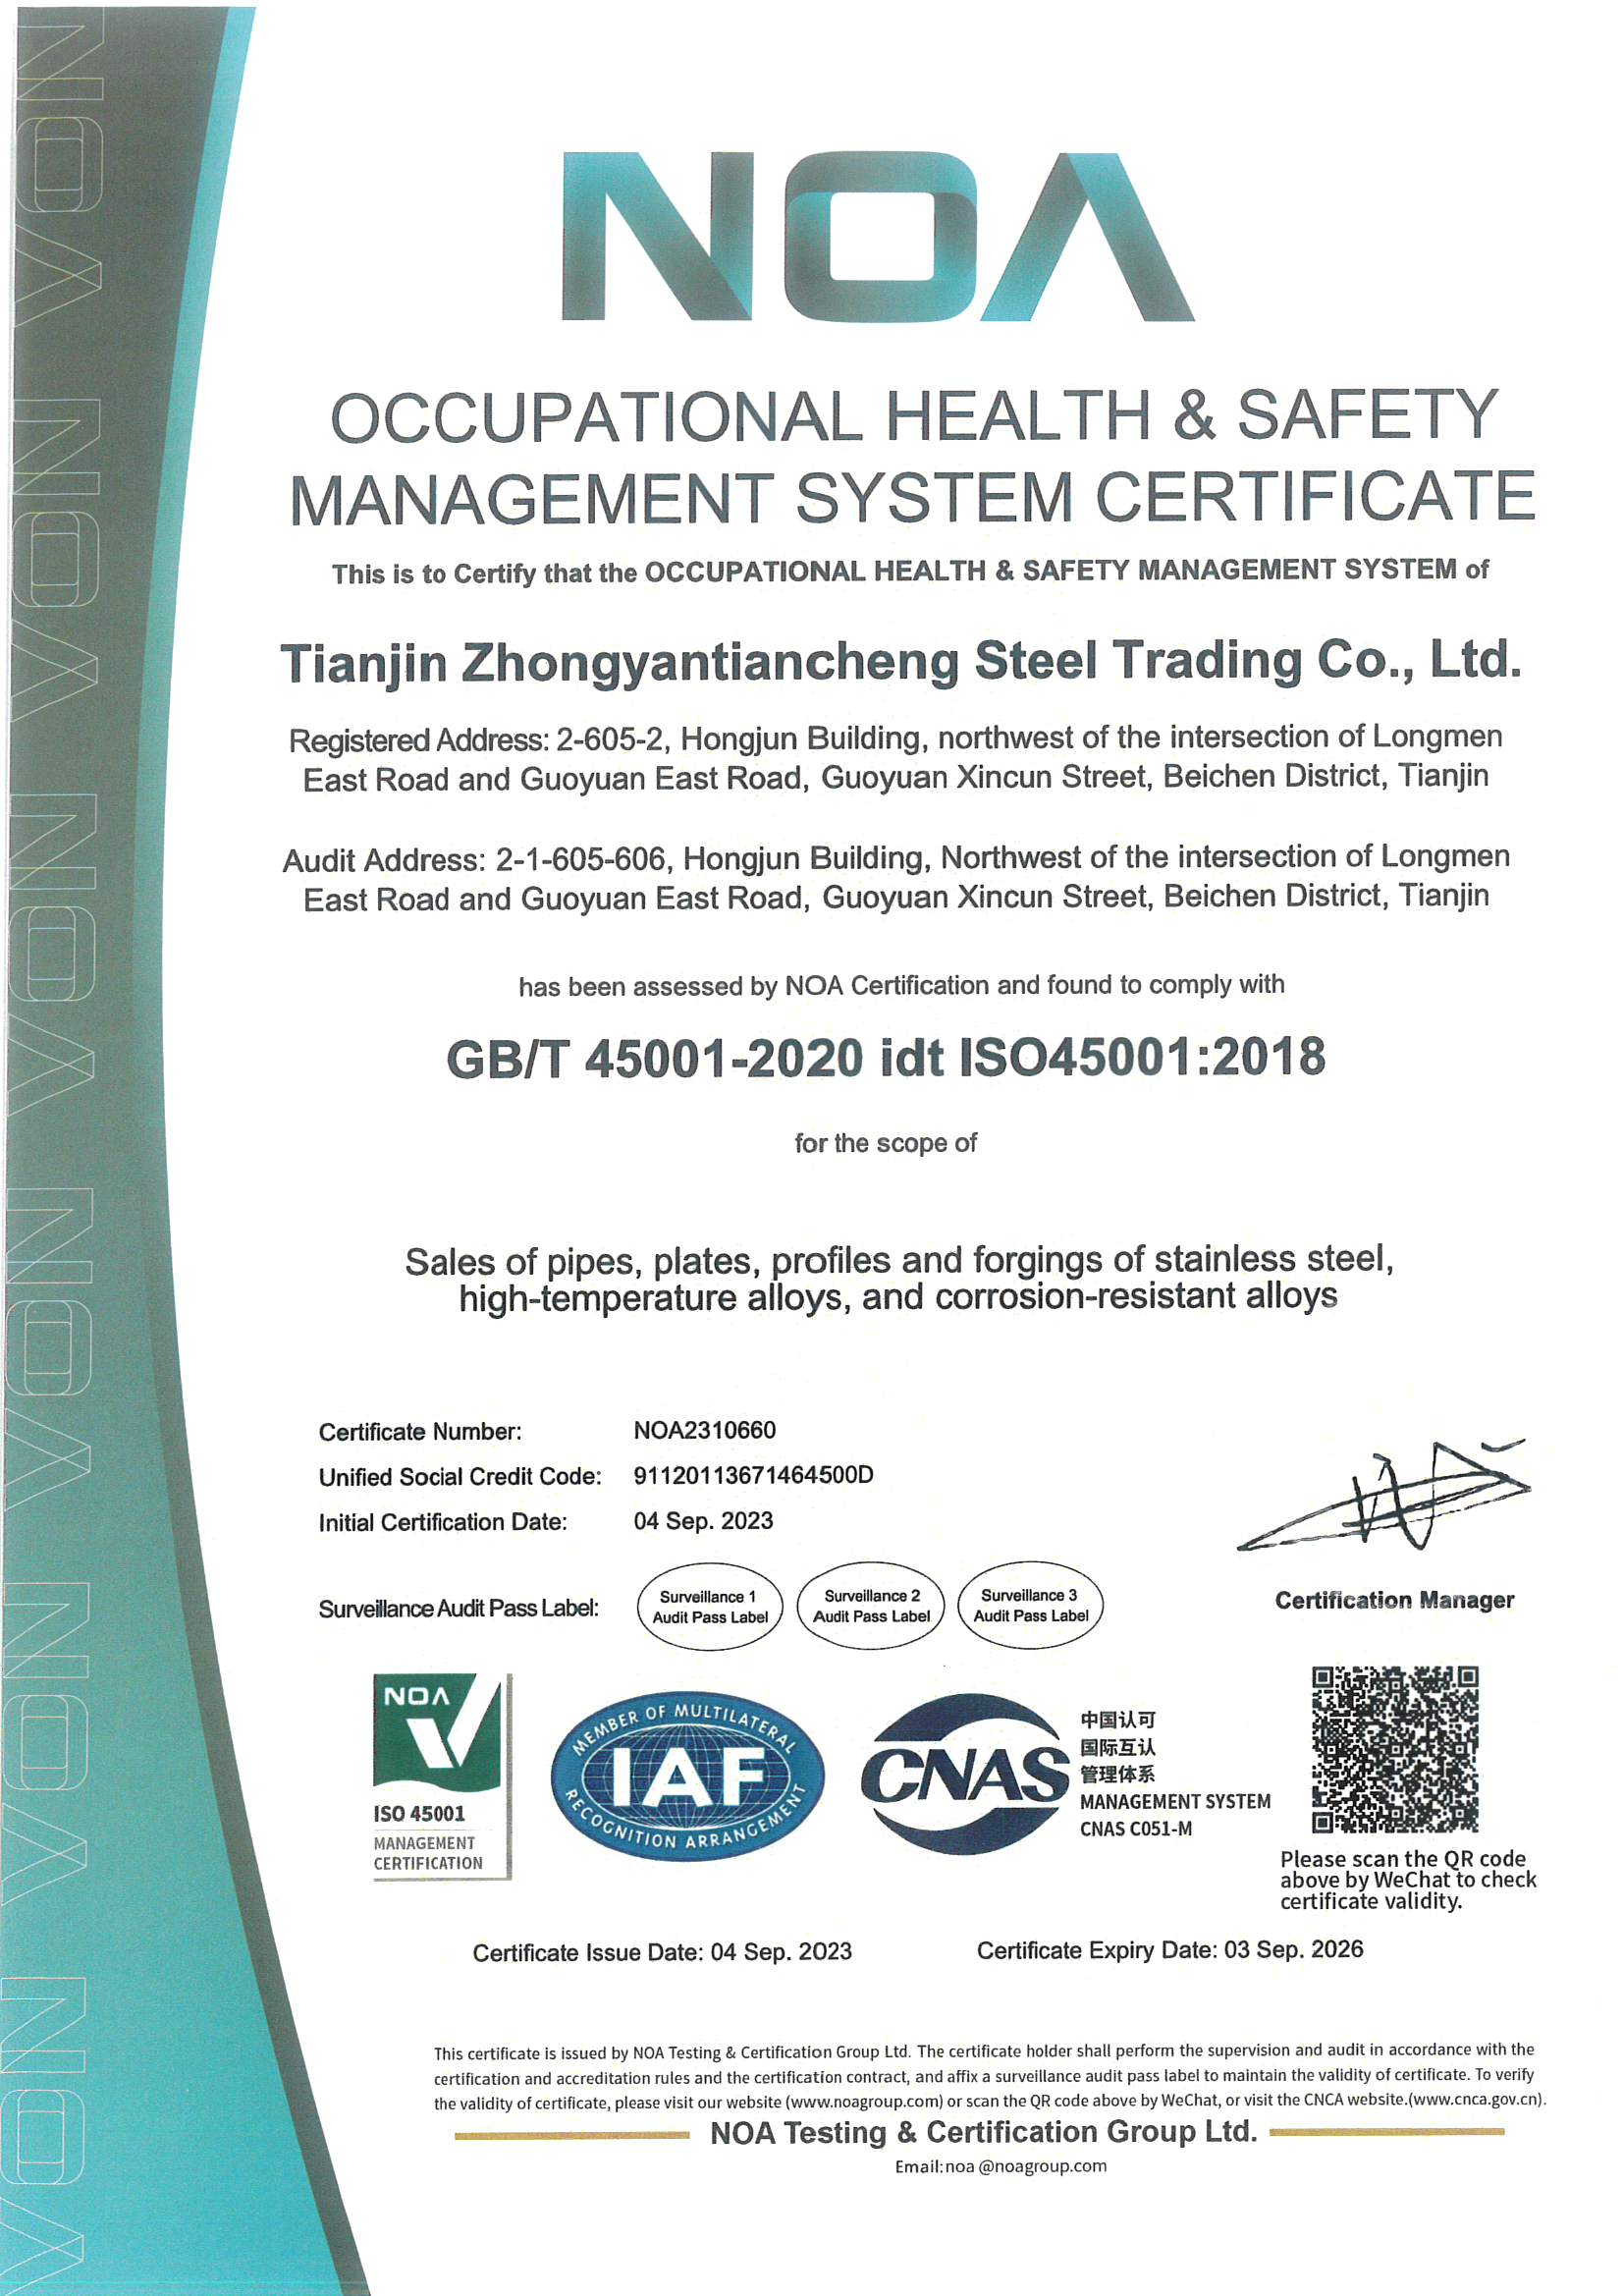 ISO45001:2018 OCCUPATIONAL HEALTH & SAFETY MANAGEMENT SYSTEM CERTIFICATE